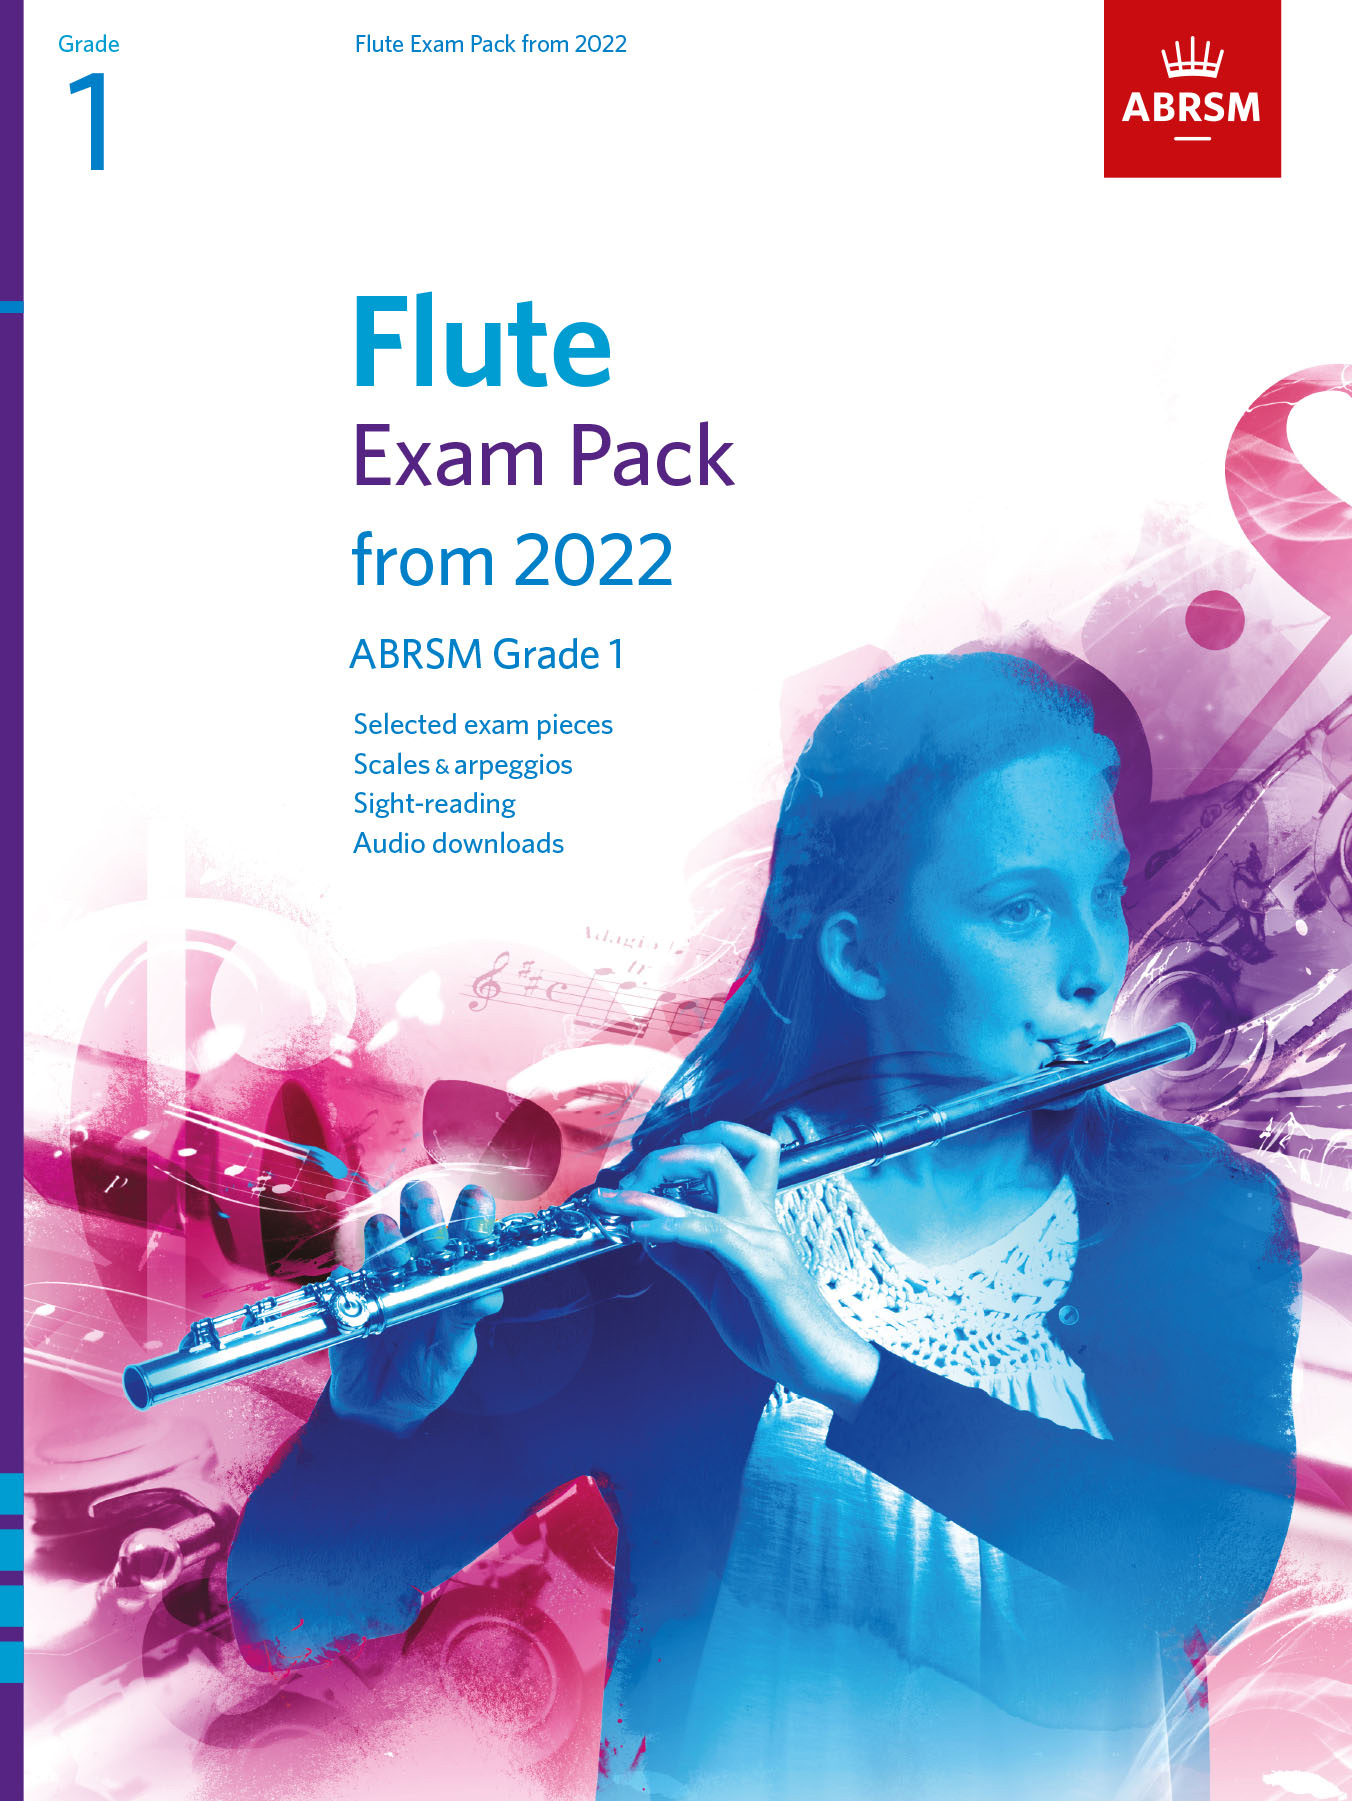 Flute Exam Pack From 2022 Grade 1 Complete Abrsm Sheet Music Songbook